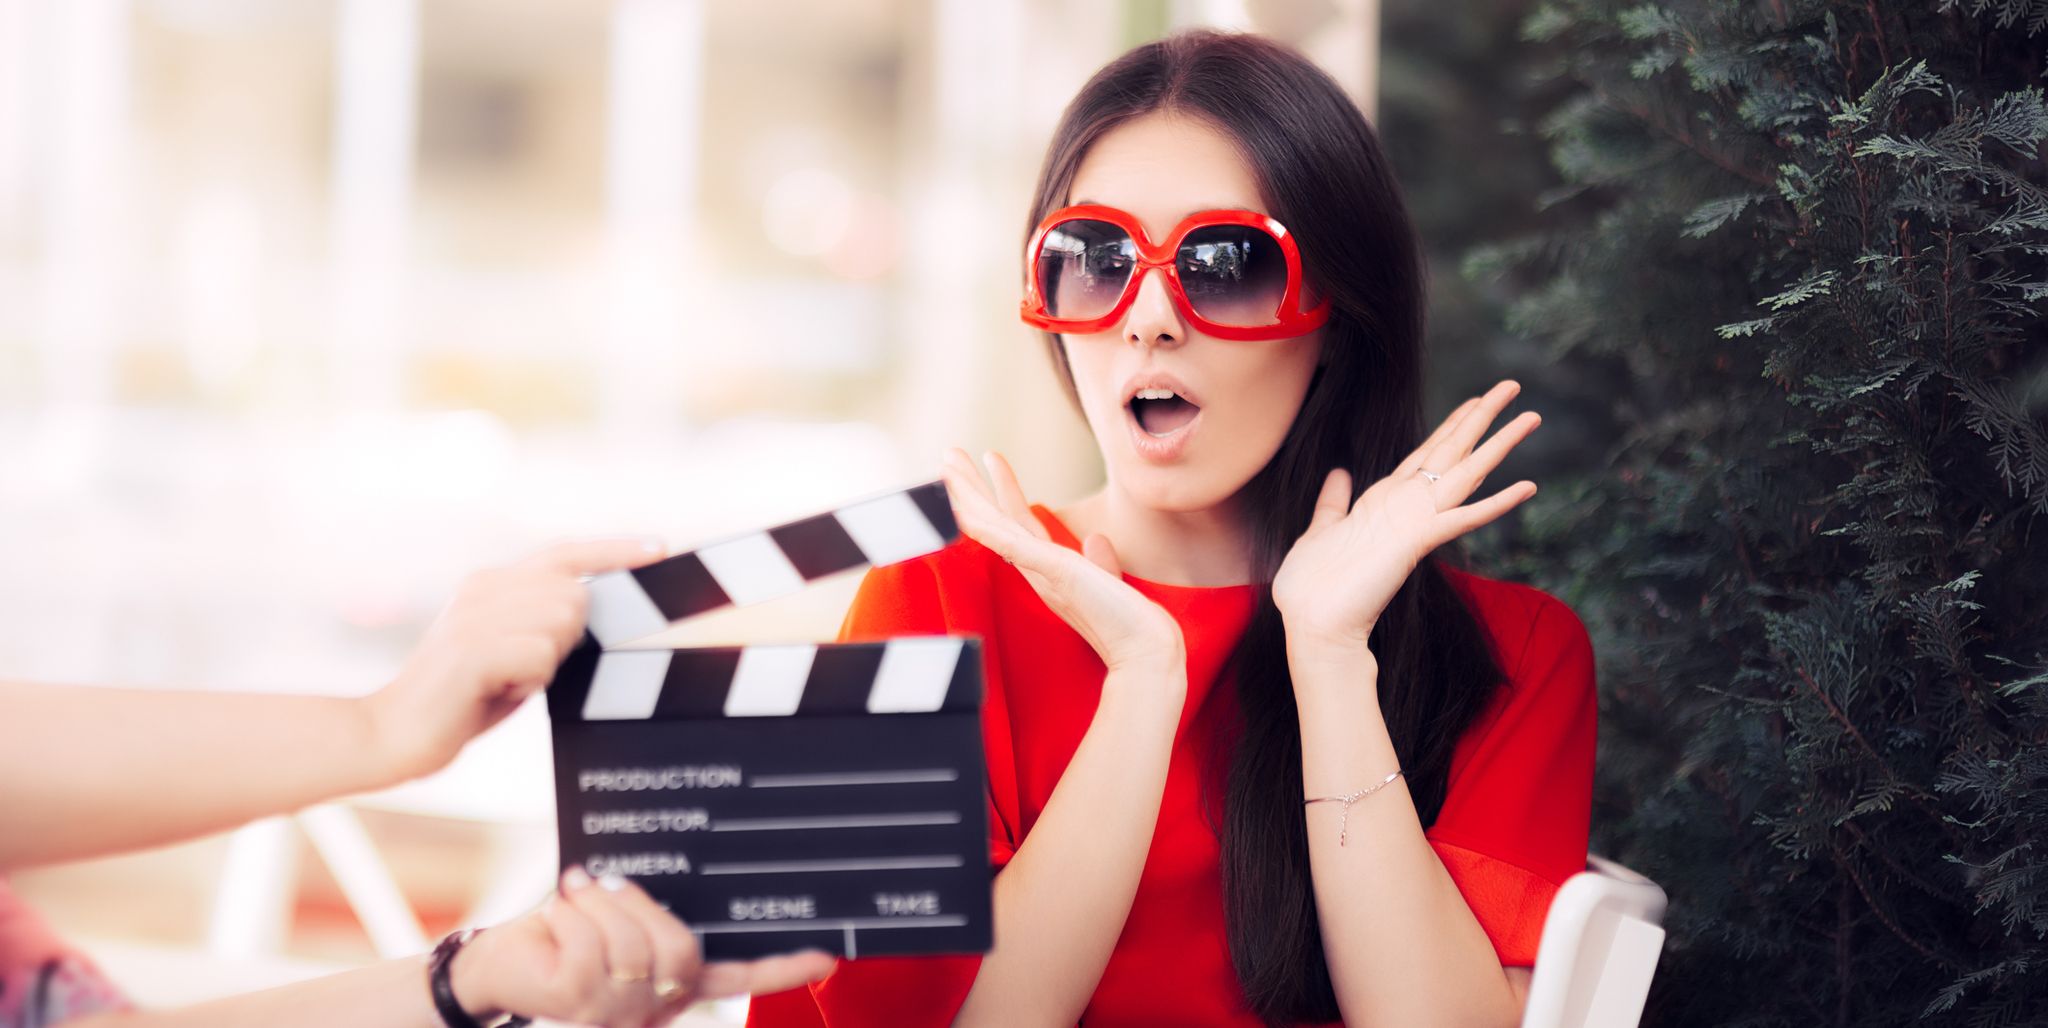 Surprised Actress with Oversized Sunglasses Shooting Movie Scene